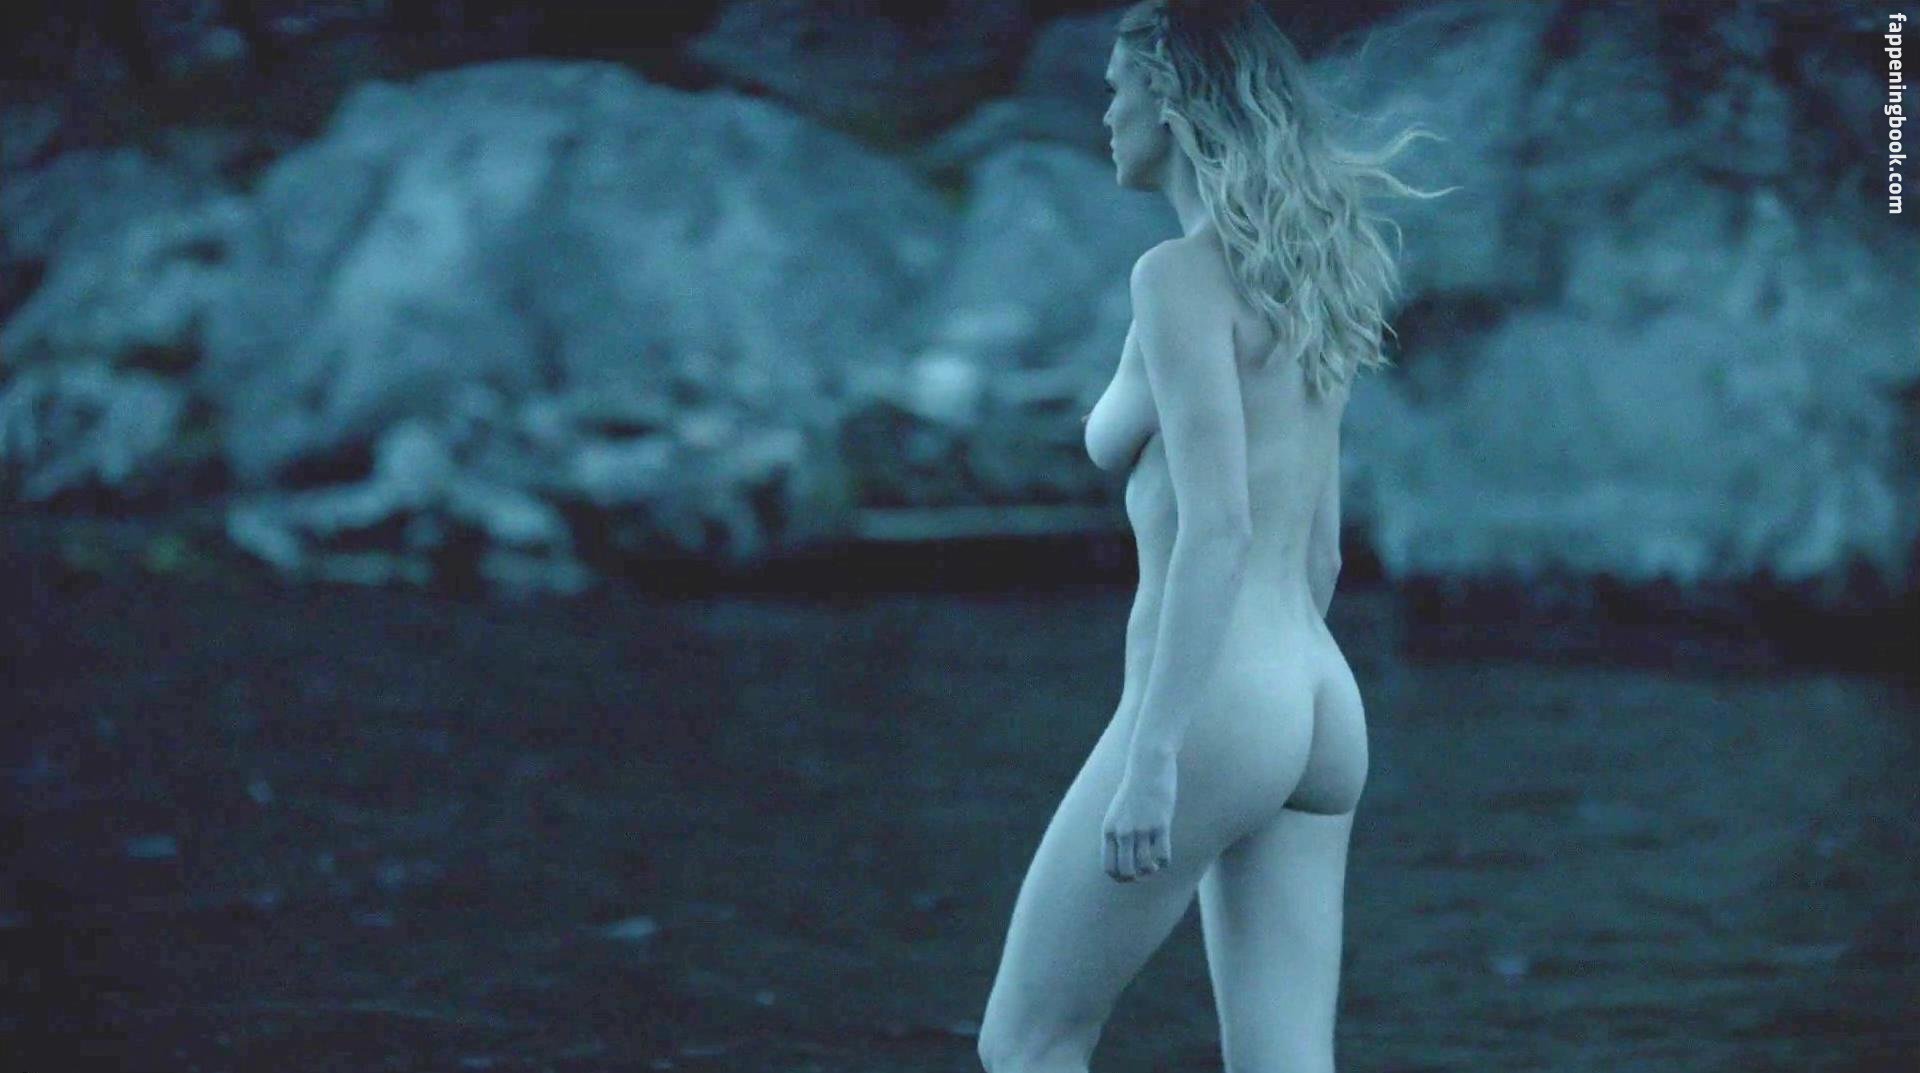 Gaia Weiss Nude, Sexy, The Fappening, Uncensored - Photo.